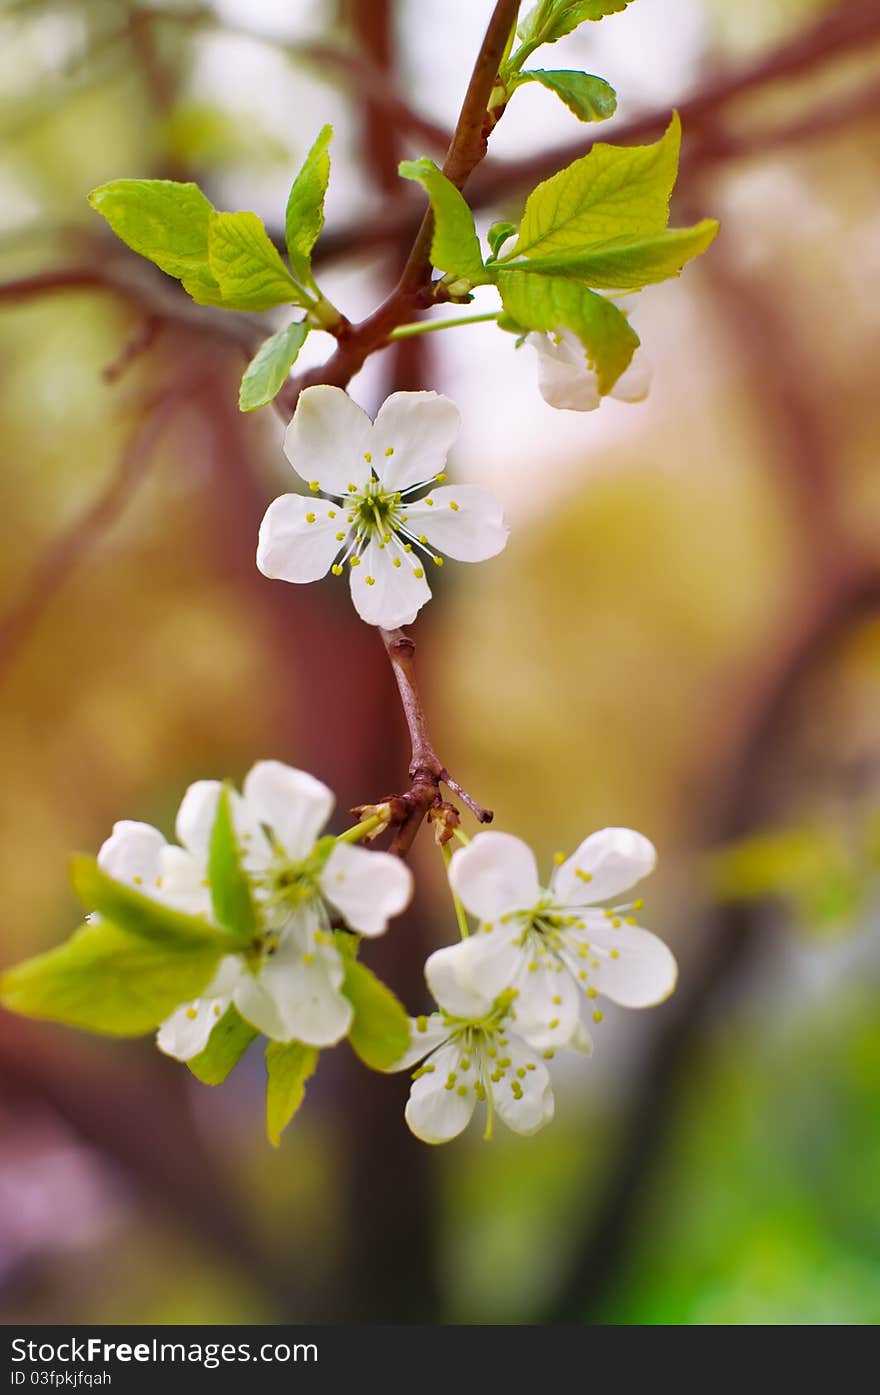 Close up shot of a branch with young blossoms in spring